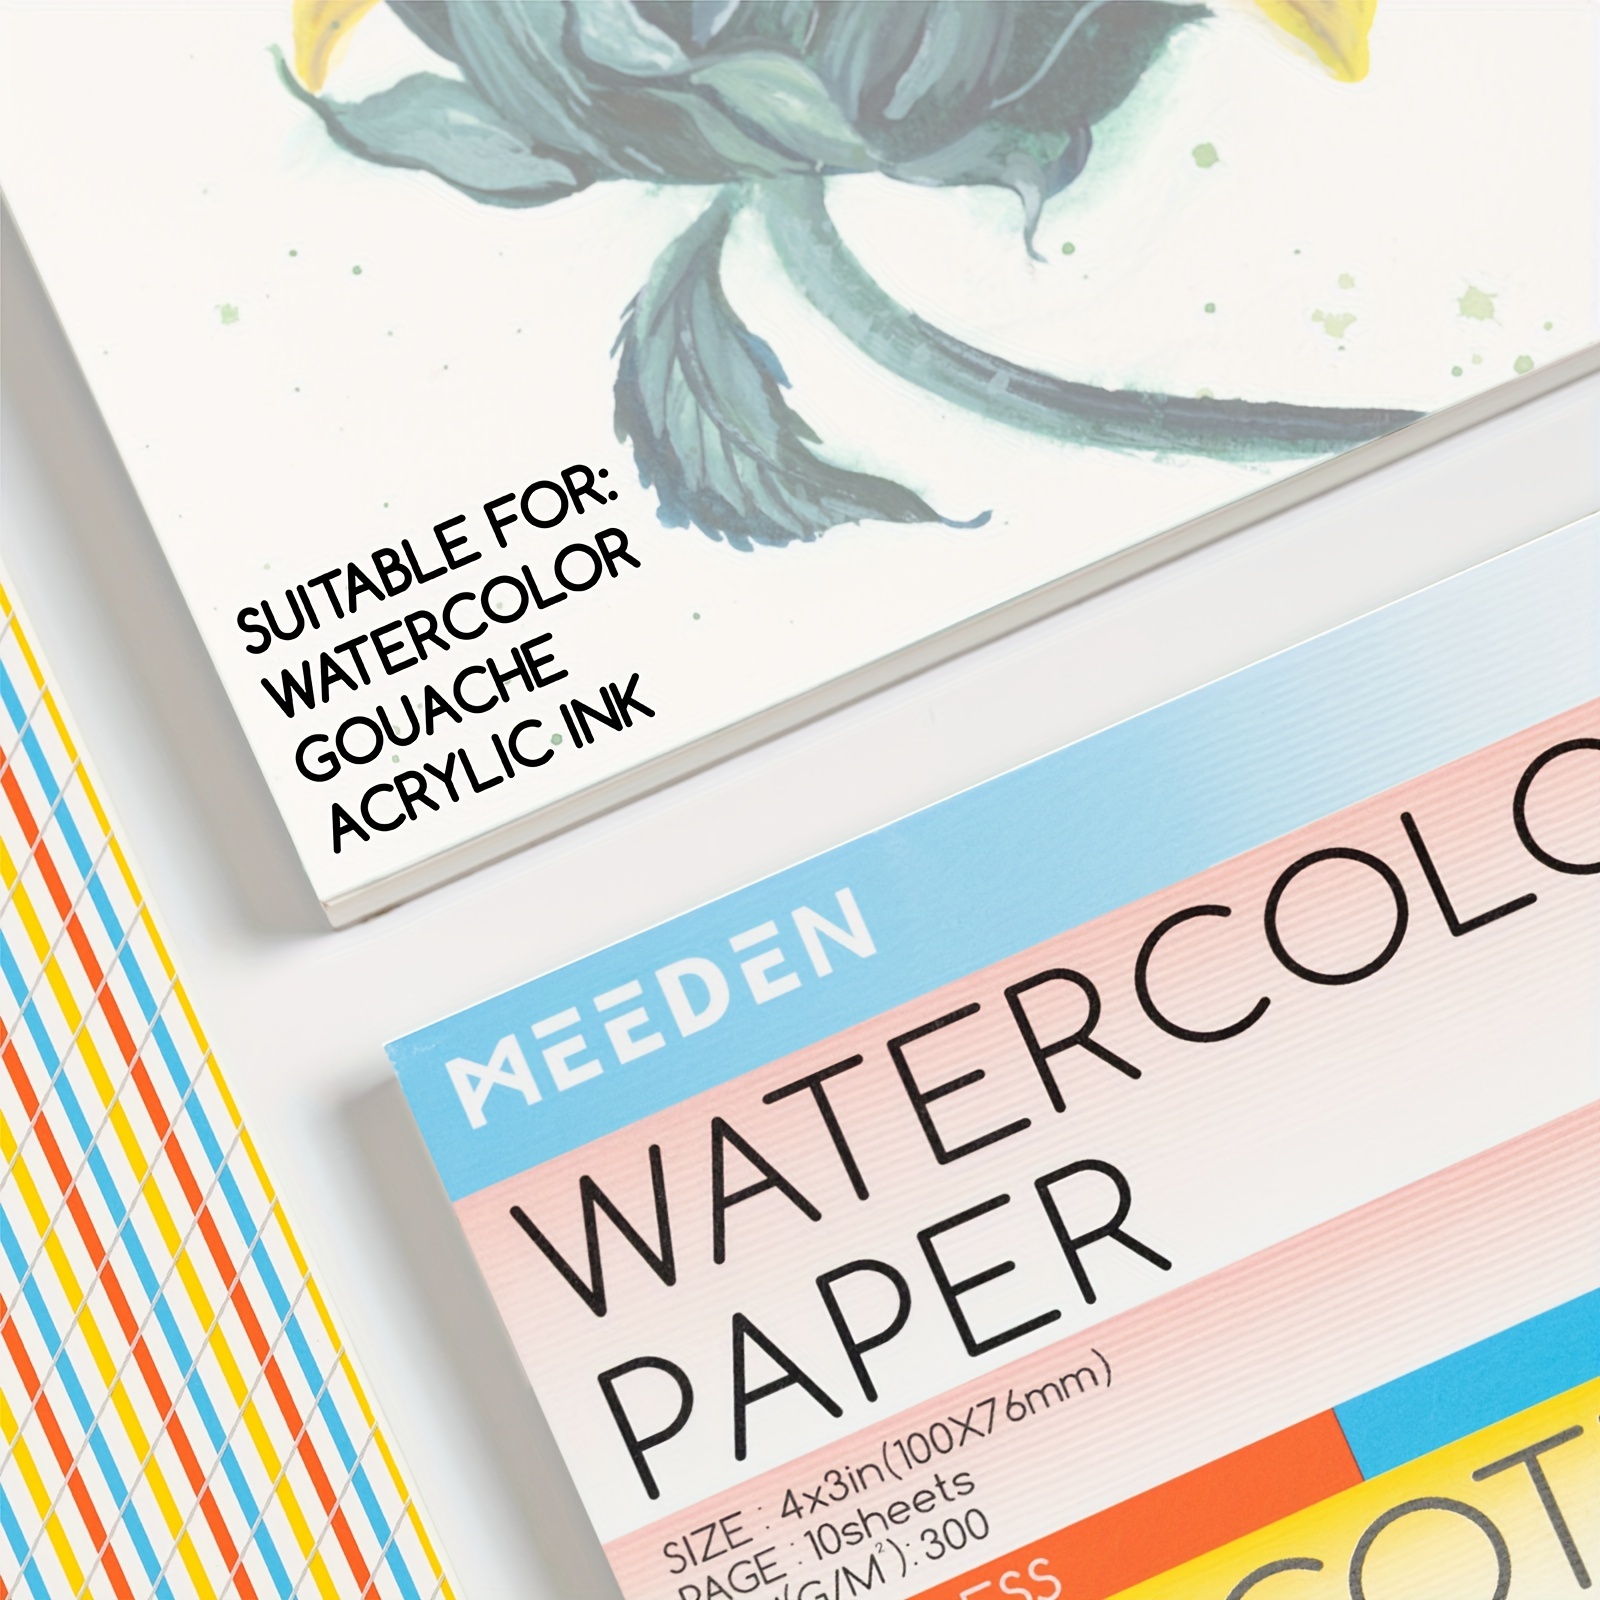 MEEDEN 5X7 Watercolor Paper Block, 20 Sheets (140lb/300gsm), Smooth  Surface 100% Cotton, Hot Press, Acid-Free Paper, Art Sketchbook Pad for  Painting